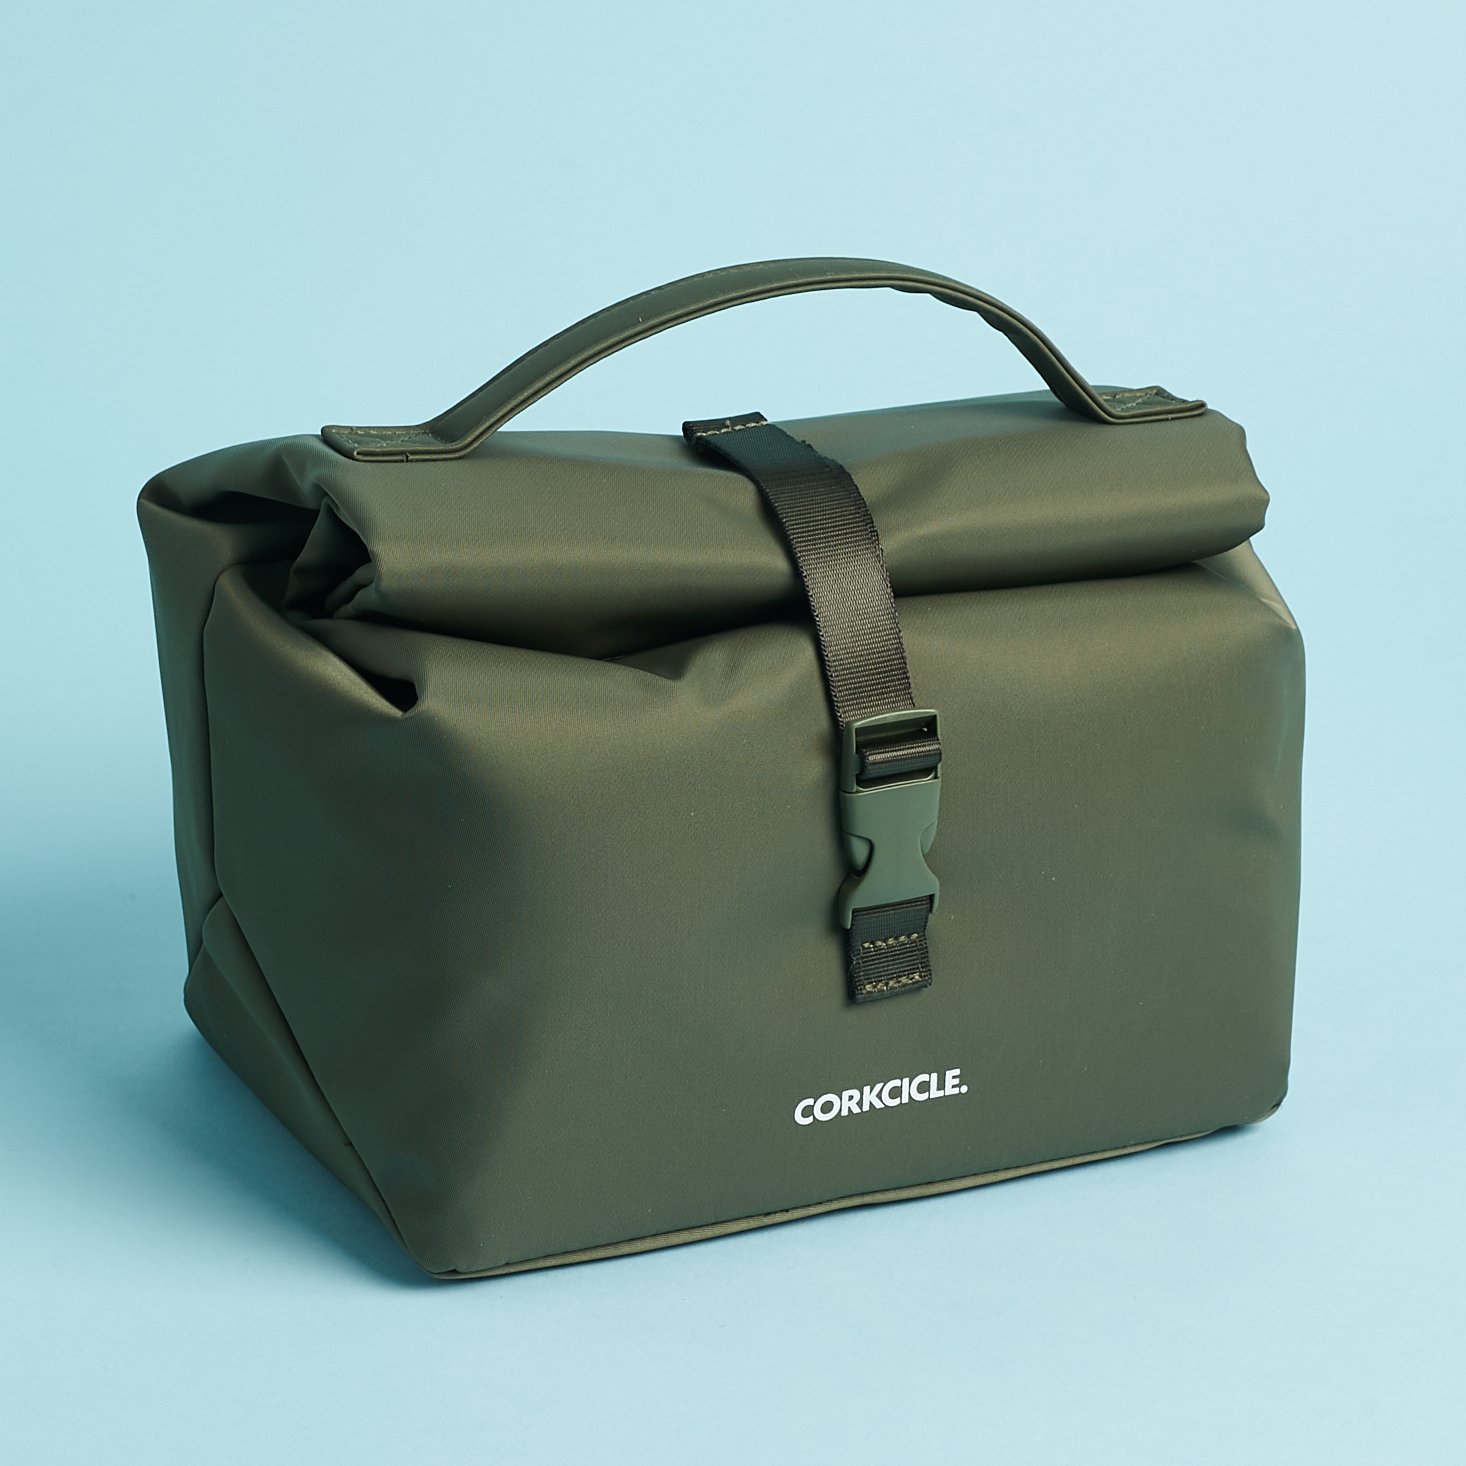 Corkcicle Nona Roll-Top Lunchbox from Breo Box Spring 2021